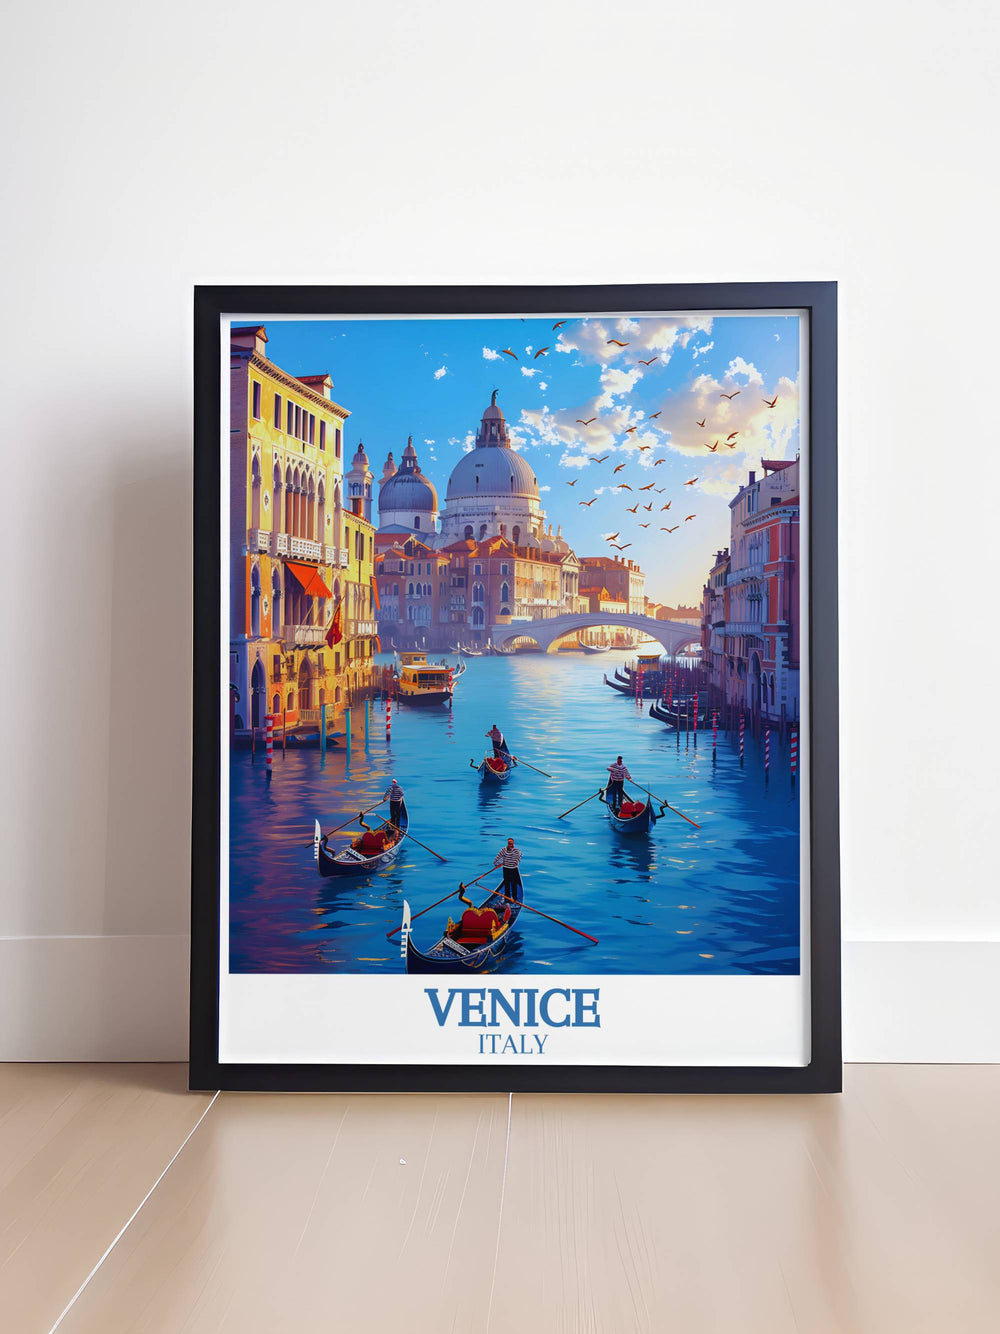 Venice travel print featuring a vibrant depiction of the Grand Canal, highlighting the intricate details and rich colors of the palaces and gondolas, bringing the timeless charm and unique beauty of Venice into your home.